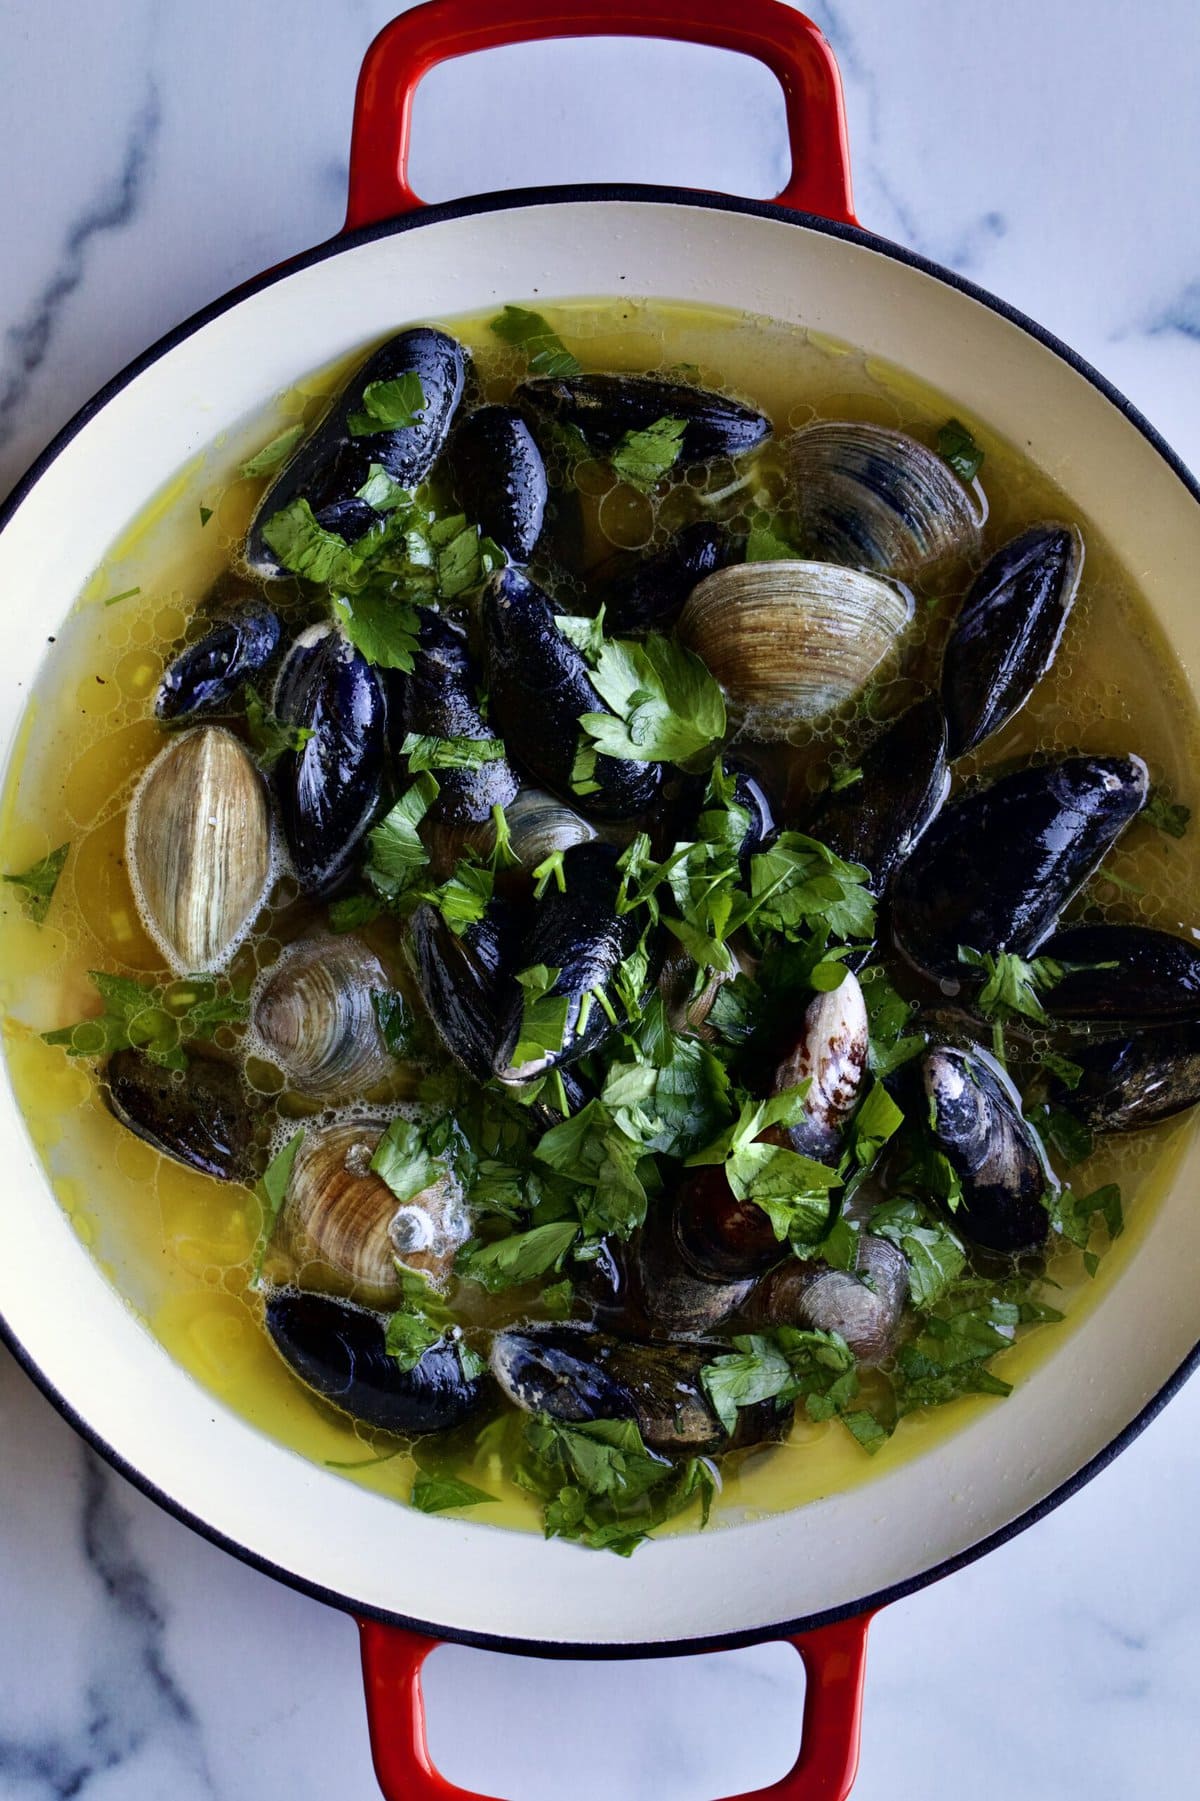 process of making recipe: add the mussels and clams and parsley to pot.